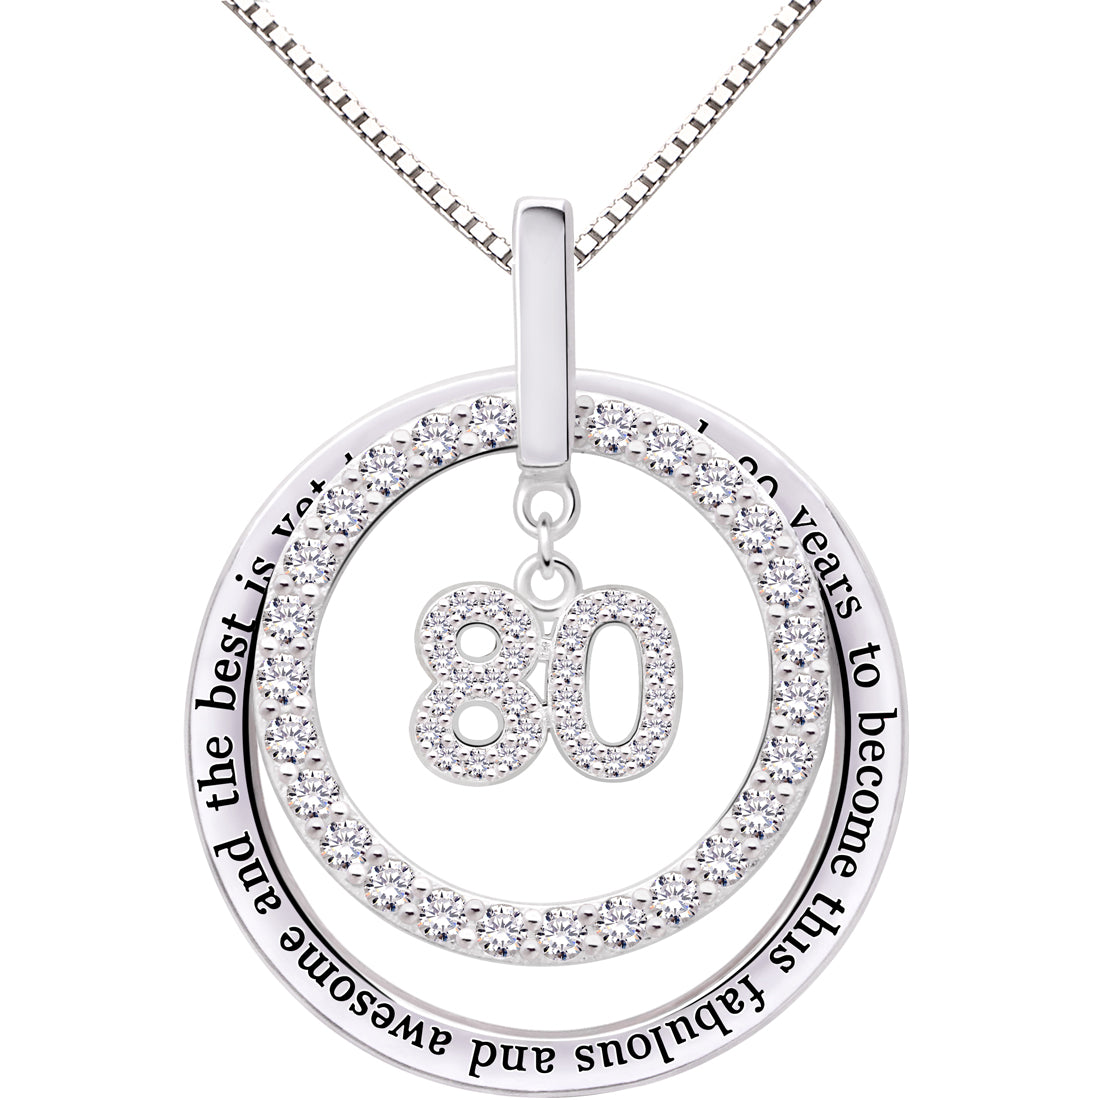 ALOV Jewelry Sterling Silver 80th Birthday It Took 80 Years to Become This Fabulous and Awesome and the Best is Yet to Come Cubic Zirconia Pendant Necklace